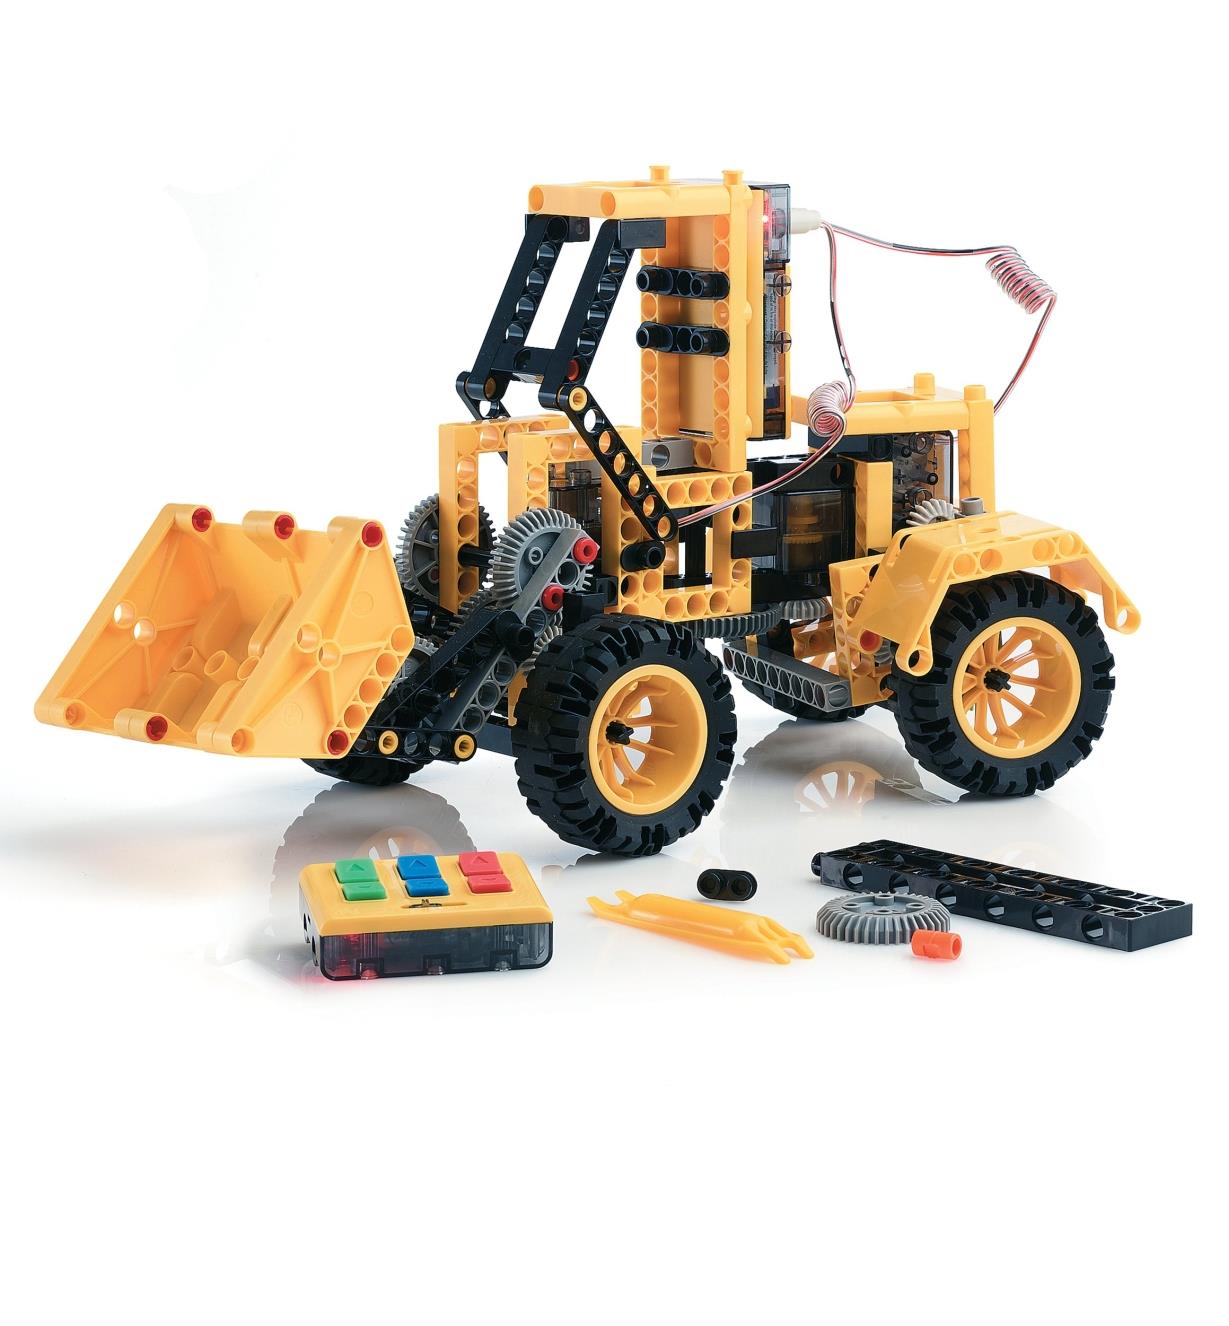 radio controlled construction vehicles